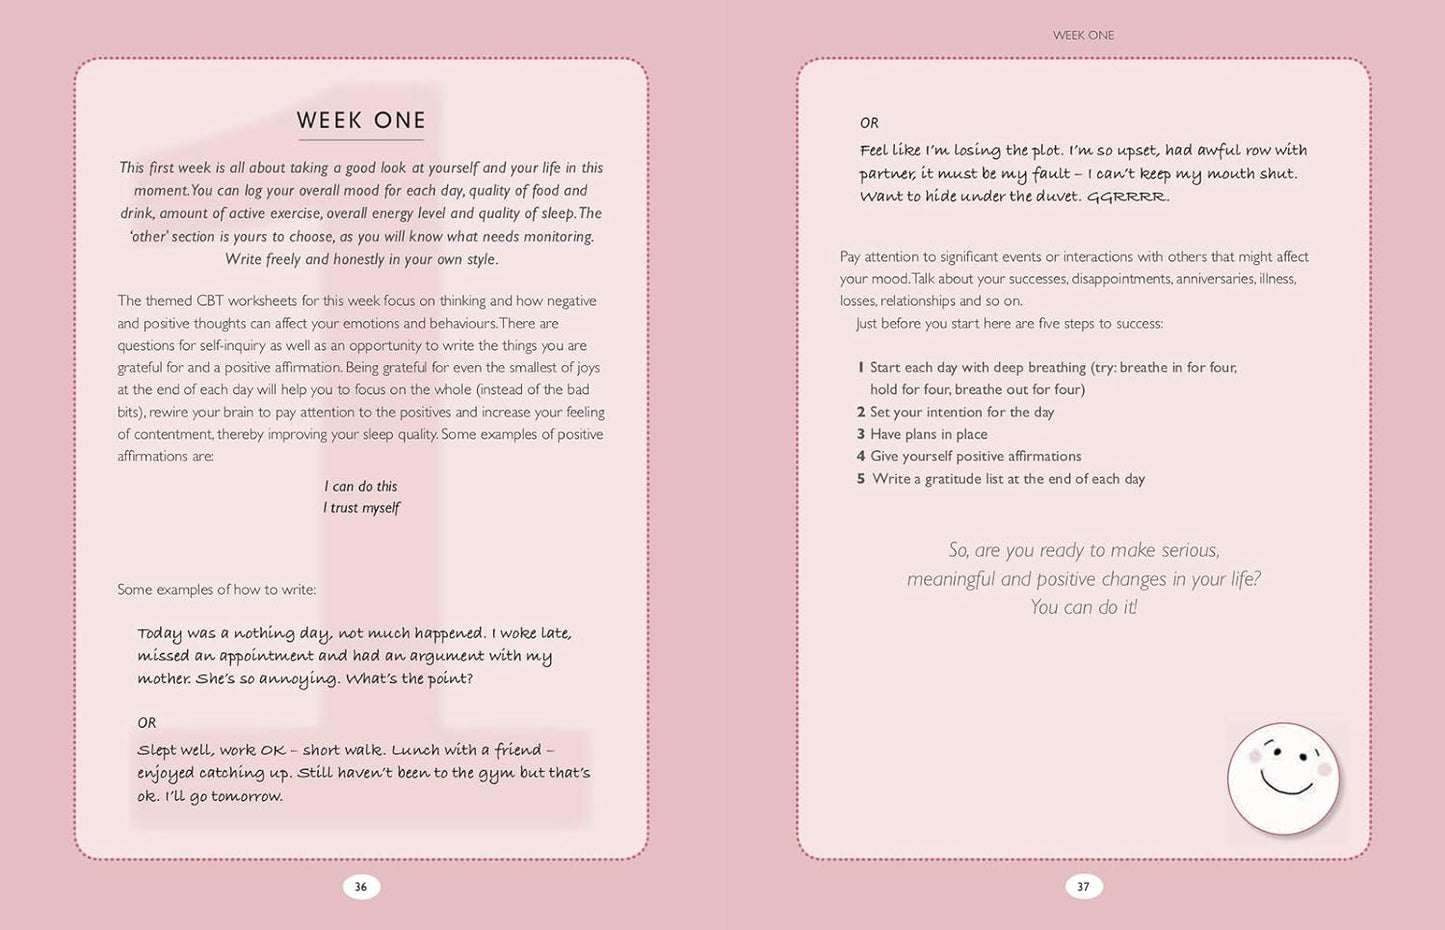 The Mood Diary: A 4-Week Plan to Track Your Emotions and Lifestyle